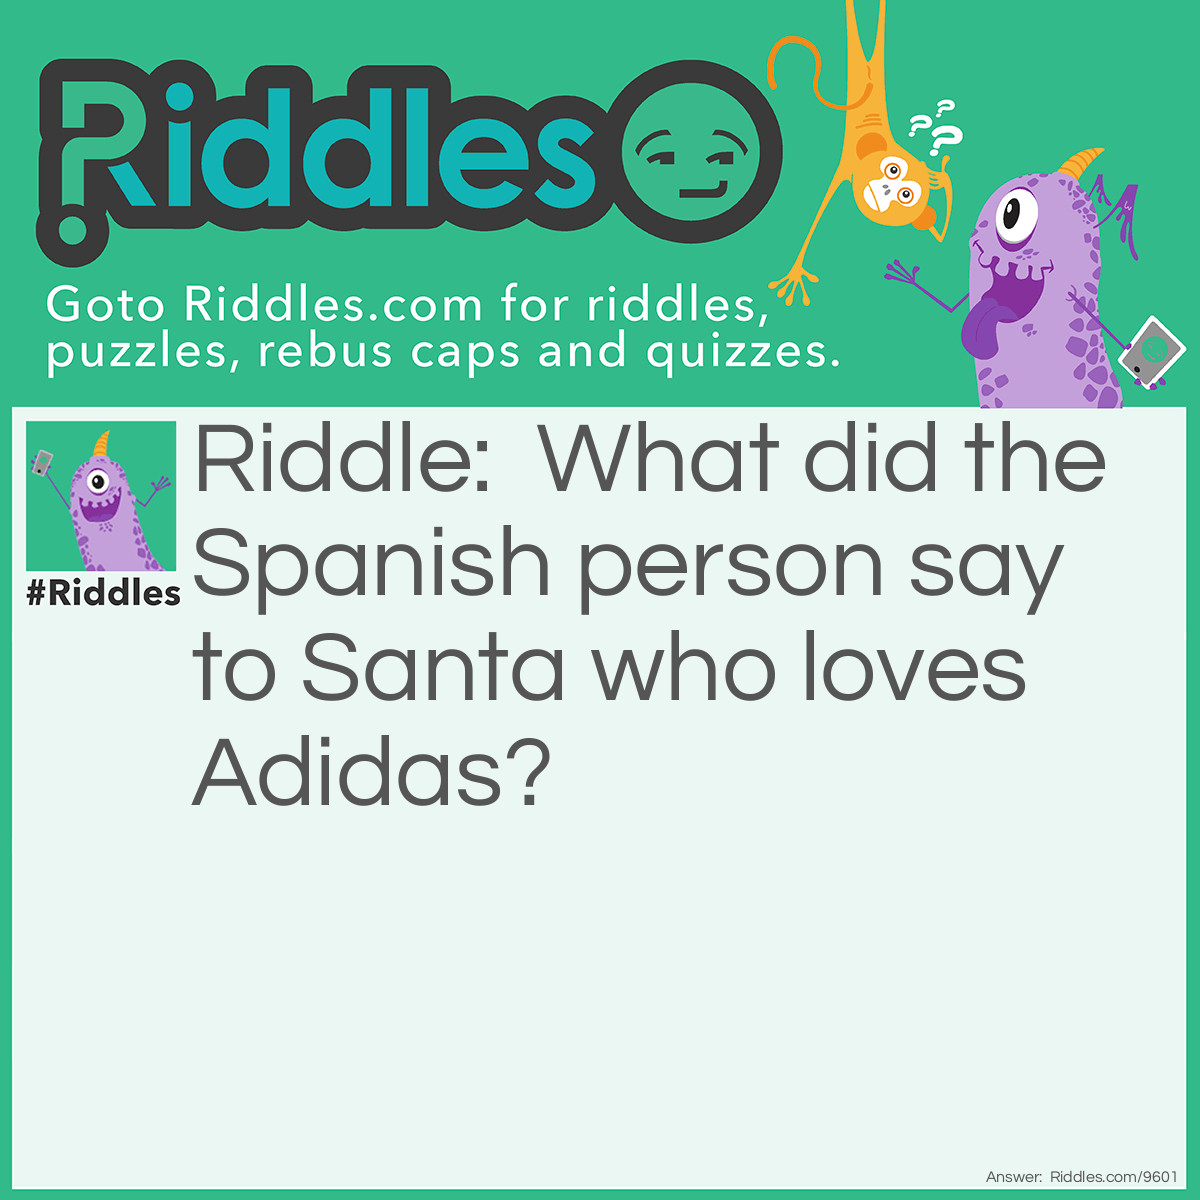 Riddle: What did the Spanish person say to Santa who loves Adidas? Answer: Feliz Adidas.